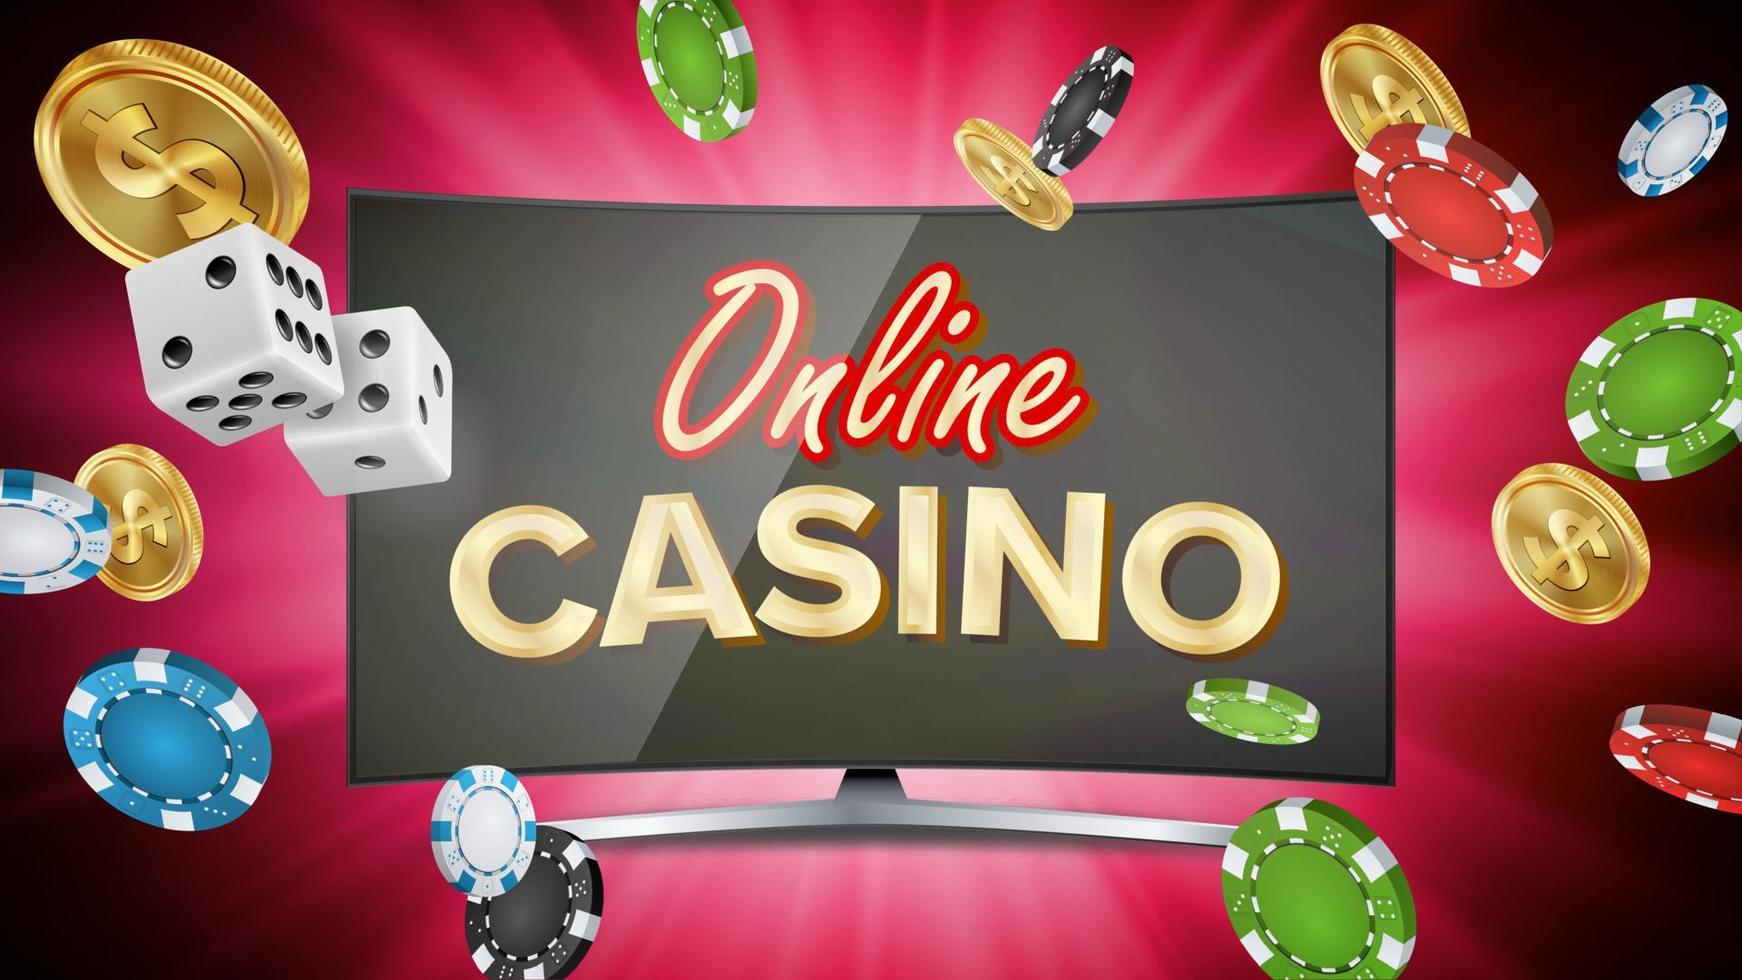 Online Casino Vector. Banner With Computer Monitor. Online Poker Gambling Casino Banner Sign. Bright Chips, Dollar Coins, Banknotes. Illustration vector